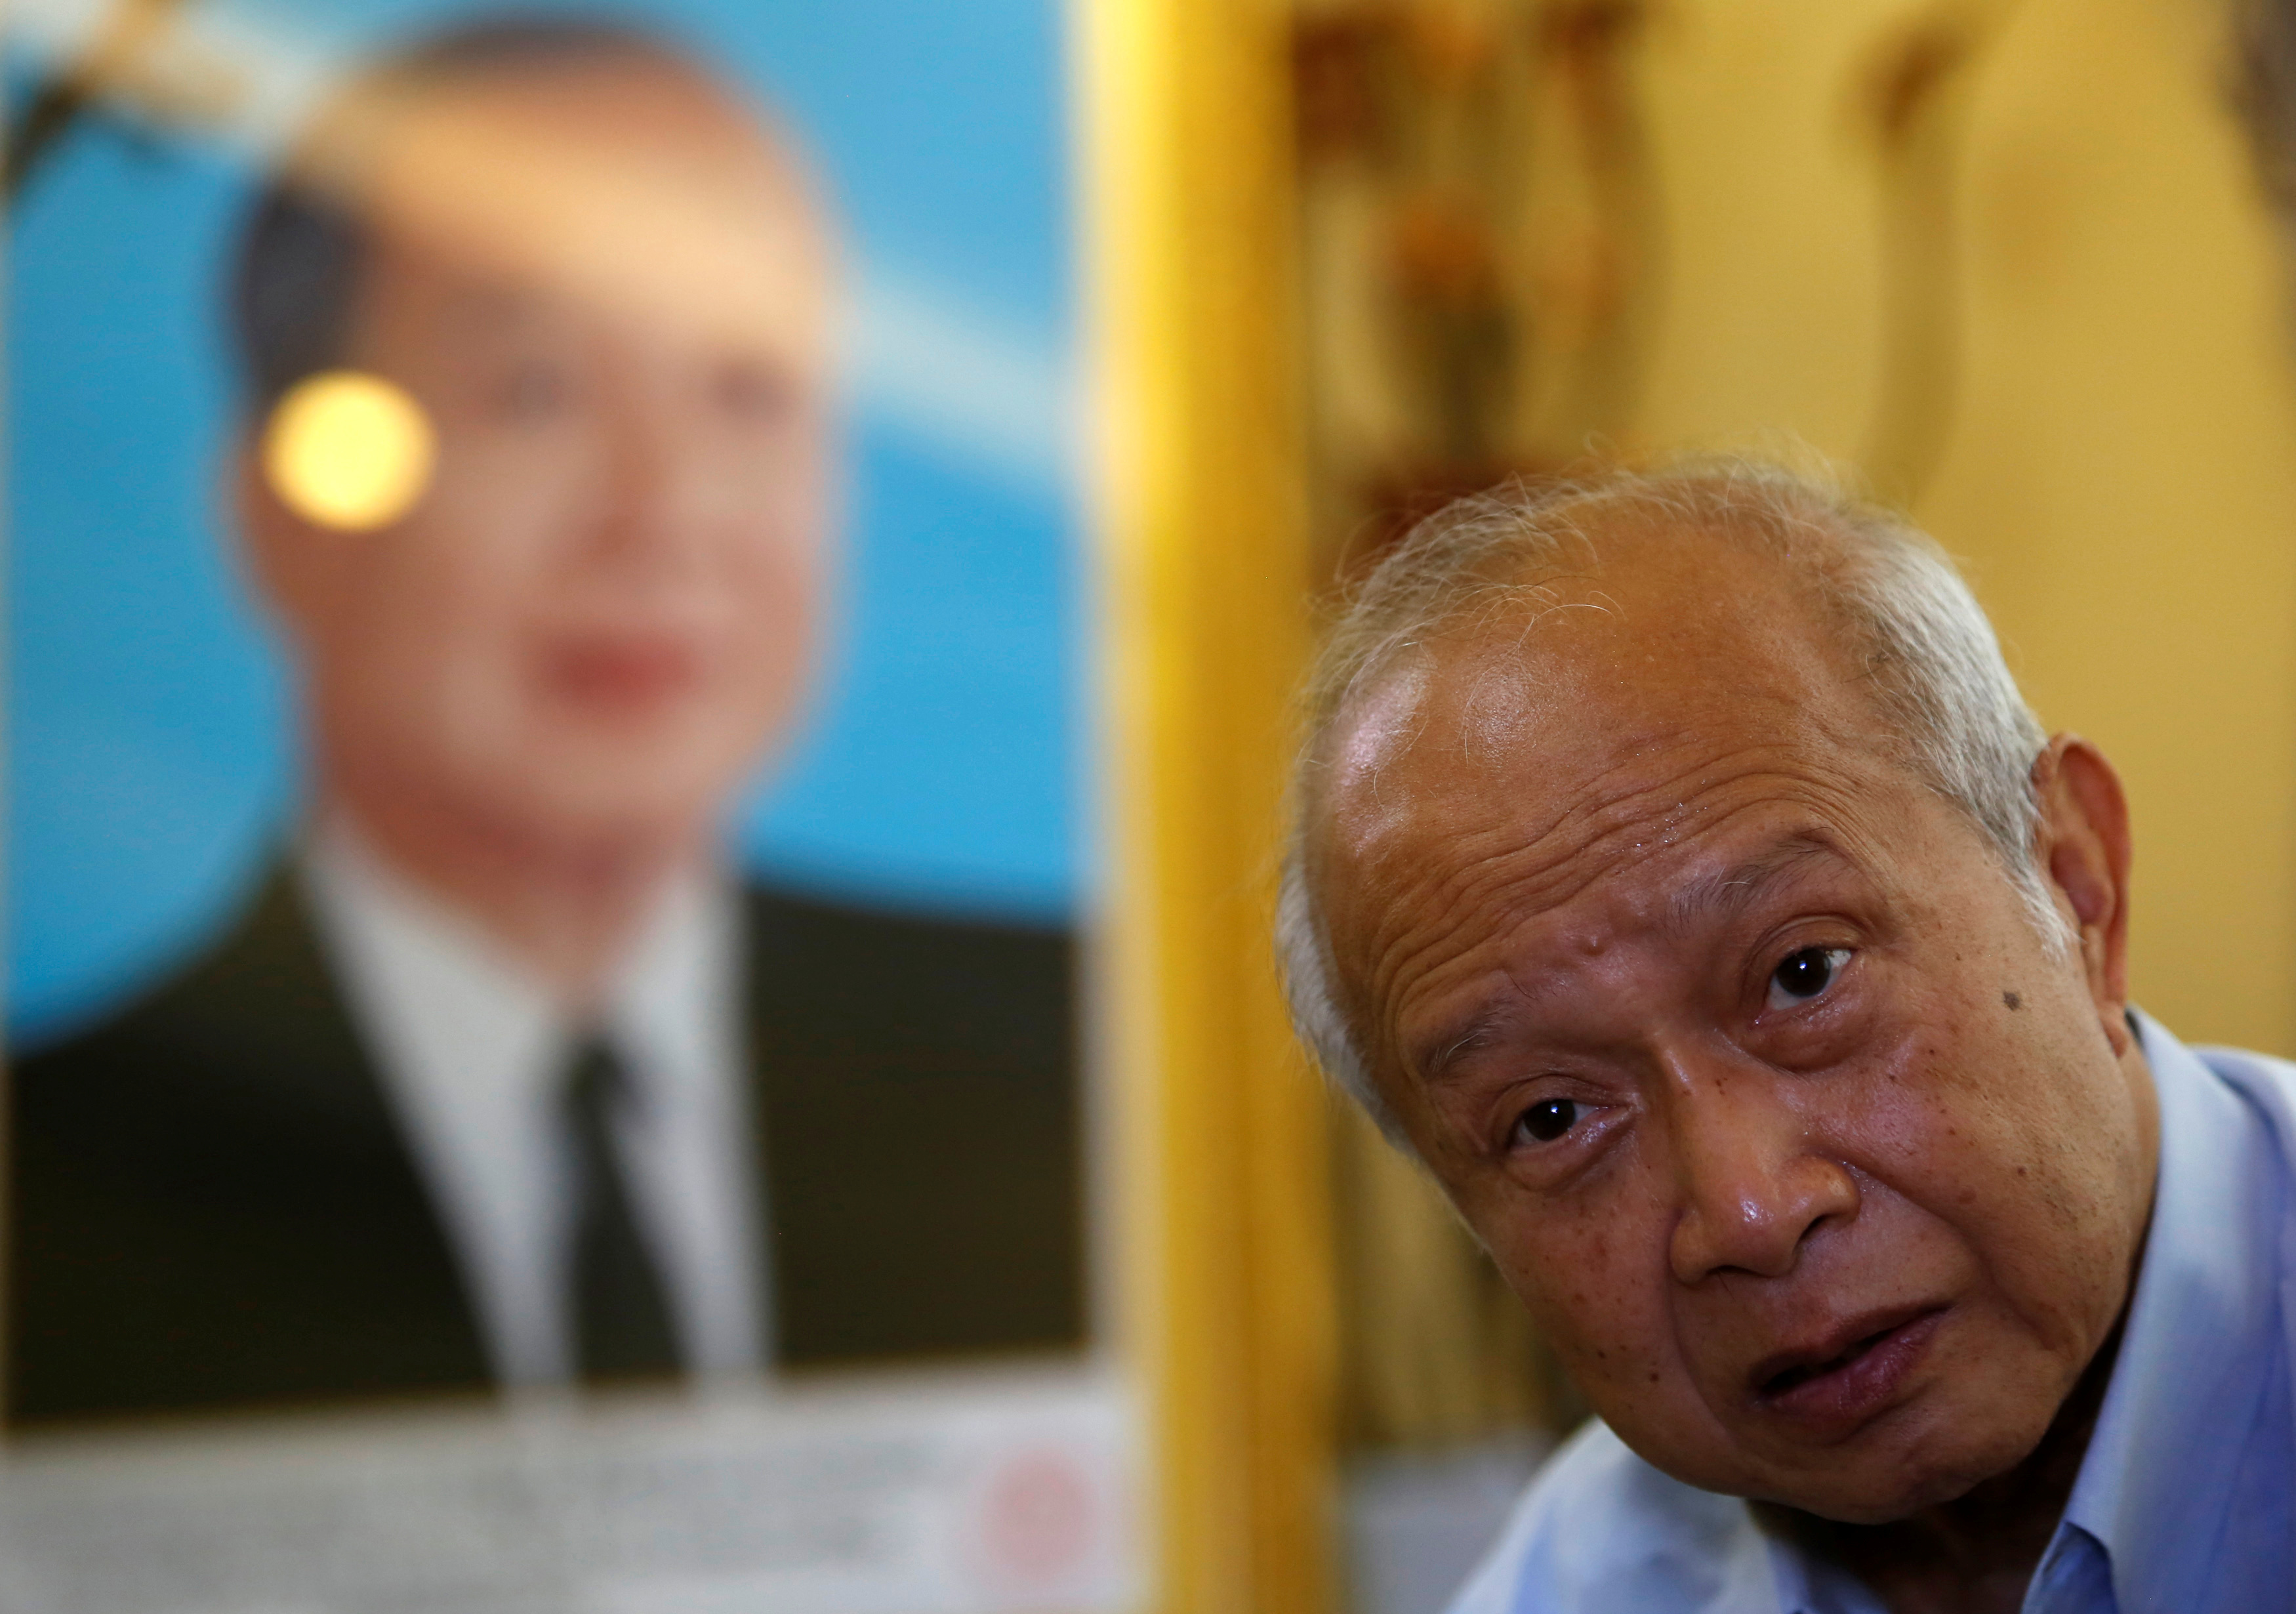 Prince Norodom Ranariddh gestures during an interview with Reuters at his home in central Phnom Penh, Cambodia October 14, 2017. REUTERS/Samrang Pring